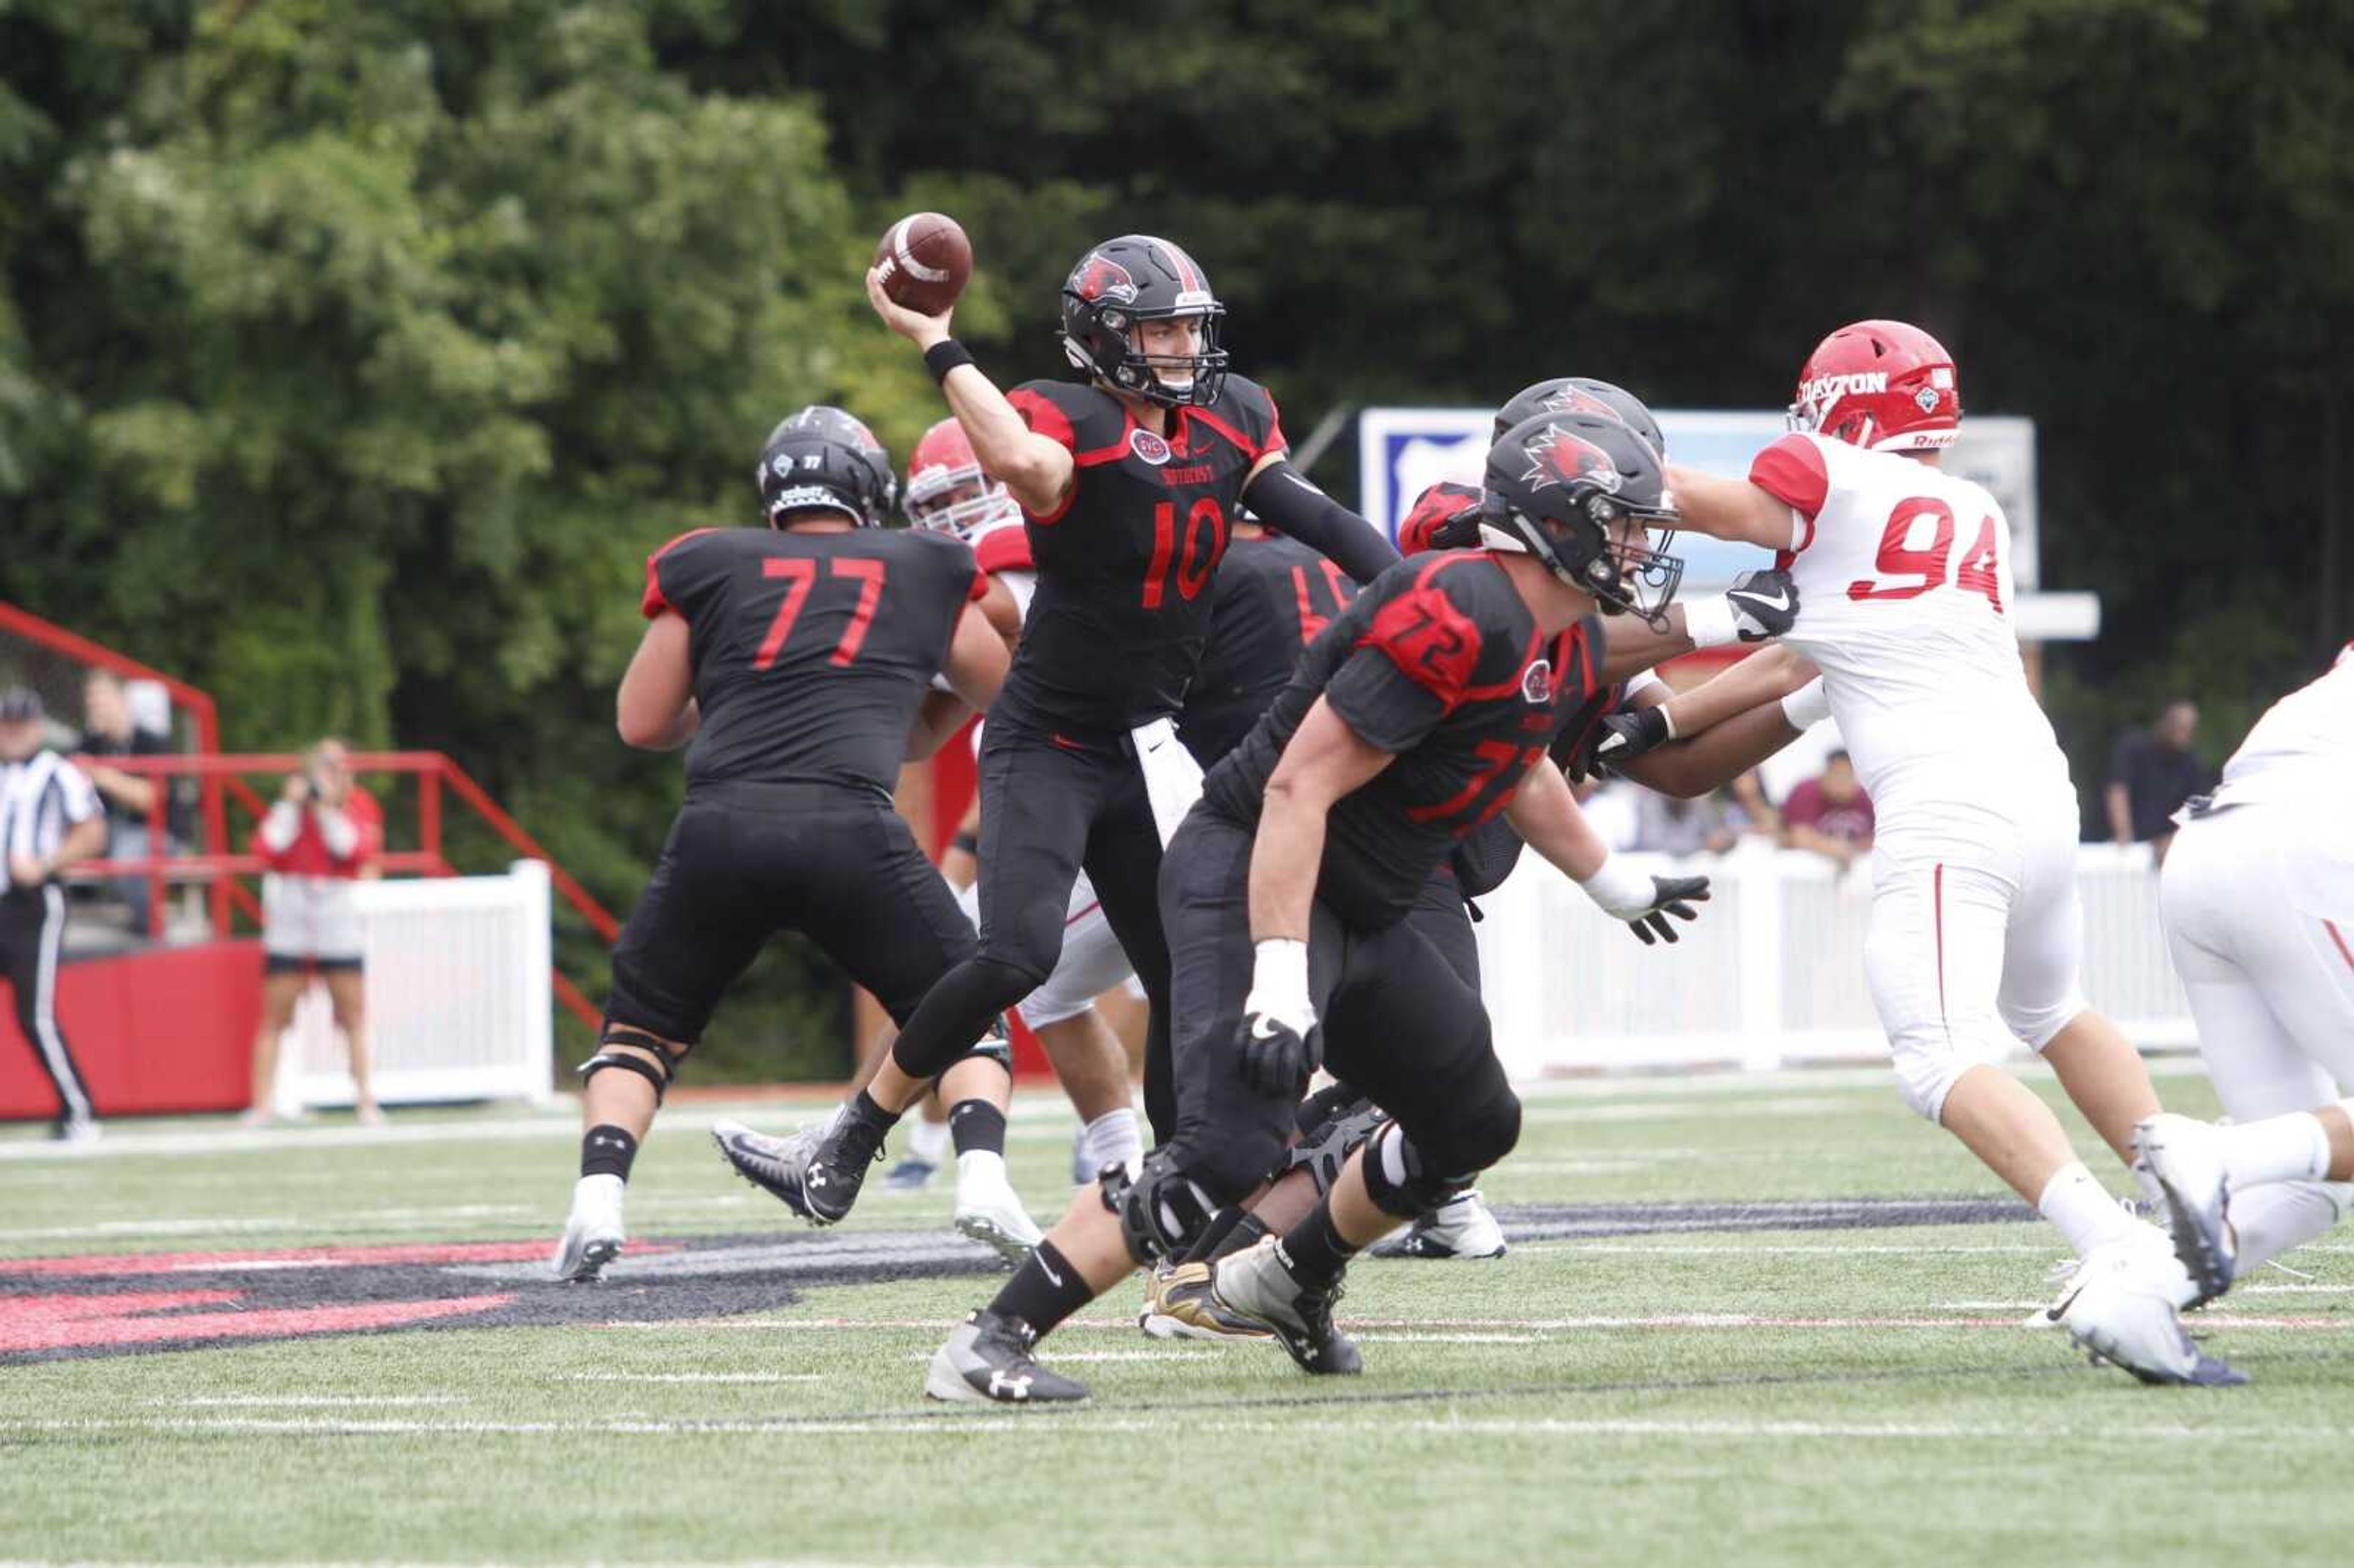 Daniel Santacaterina elevates to make a pass during a 40-21 win over Dayton on Sept. 8.